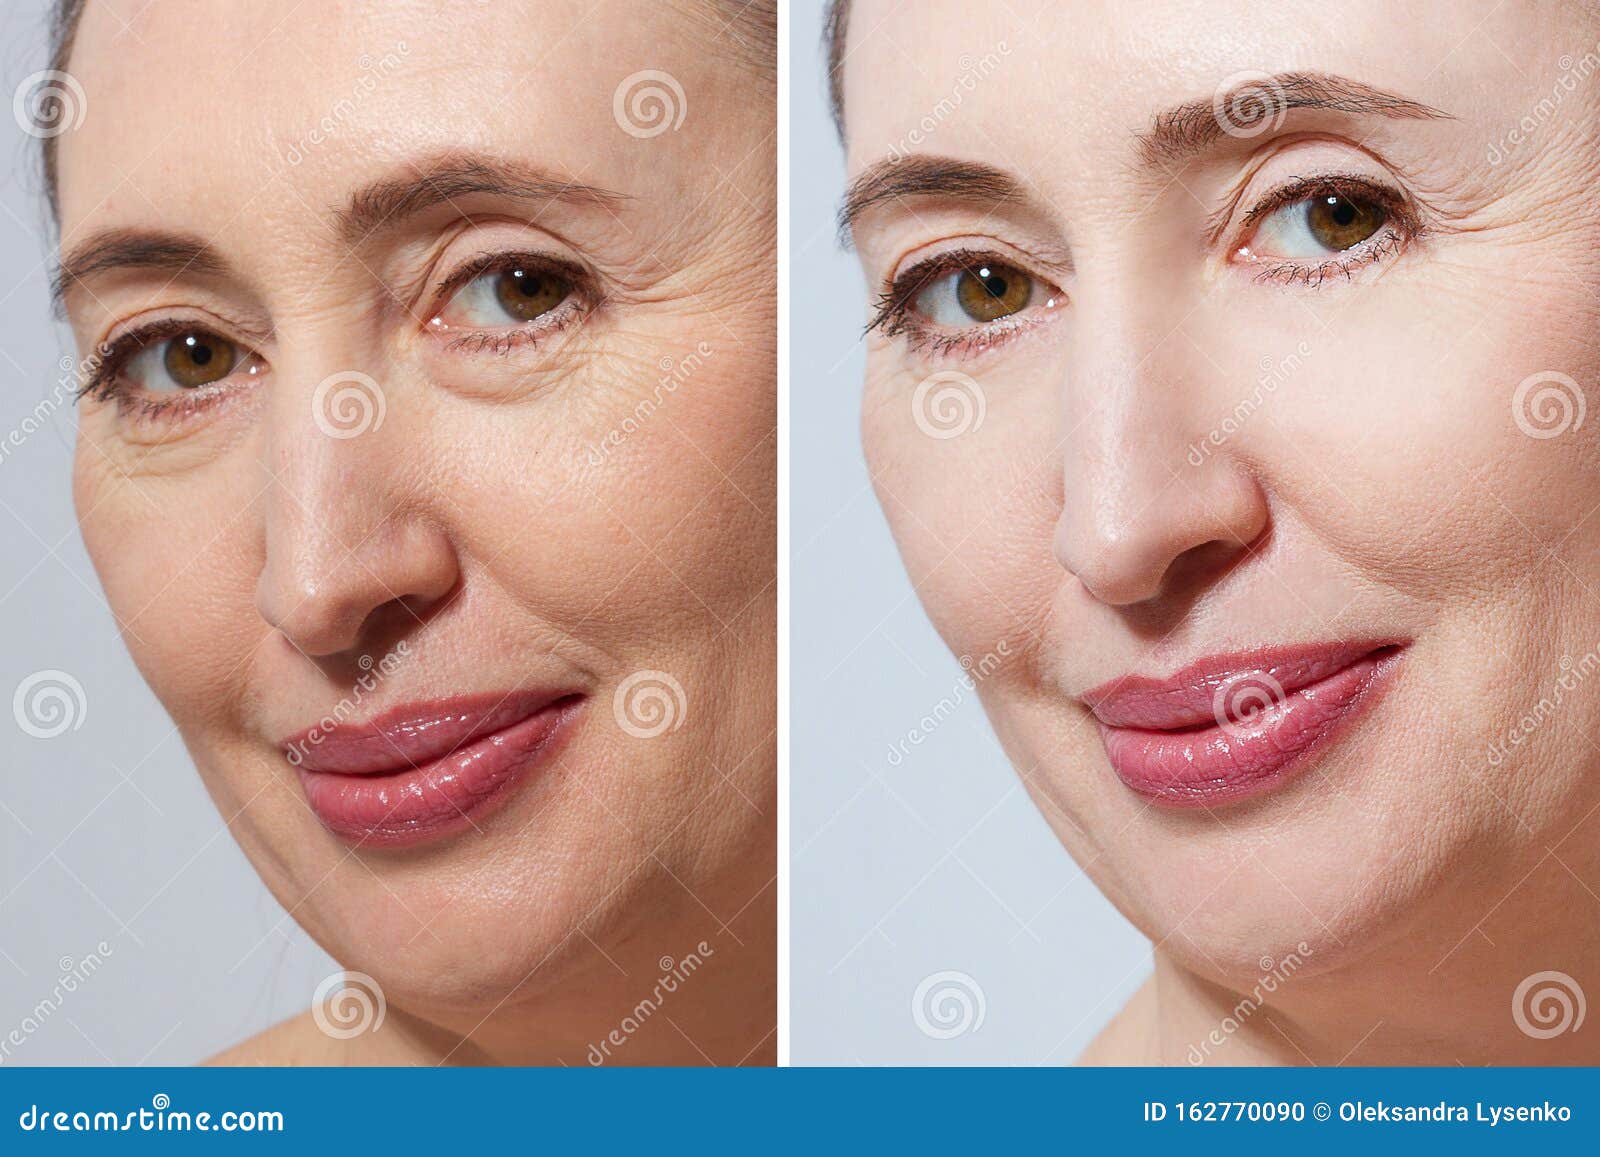 anti aging facial before and after)